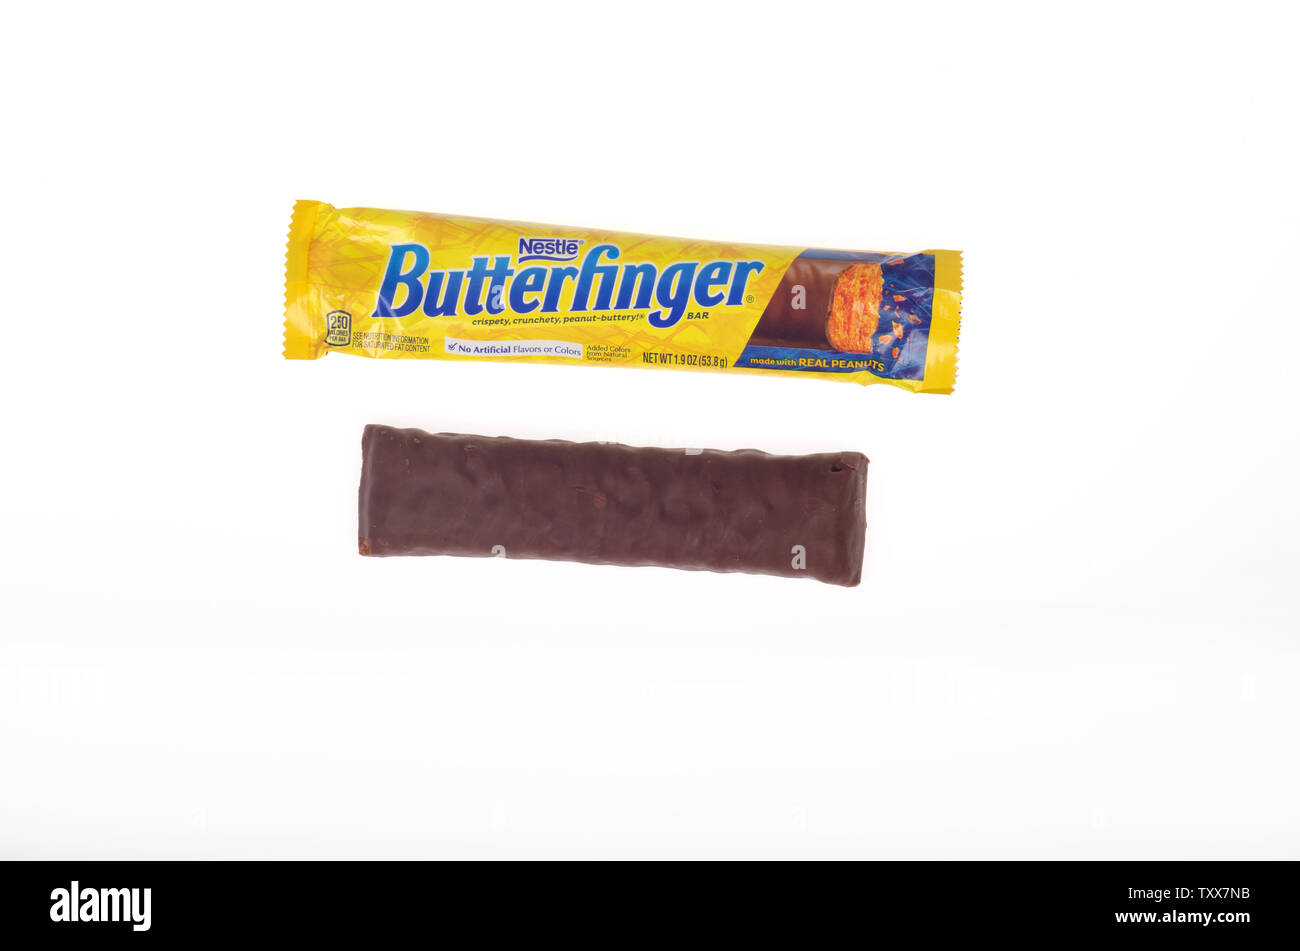 Nestle Butterfinger candy bar with wrapper opened showing candy Stock Photo